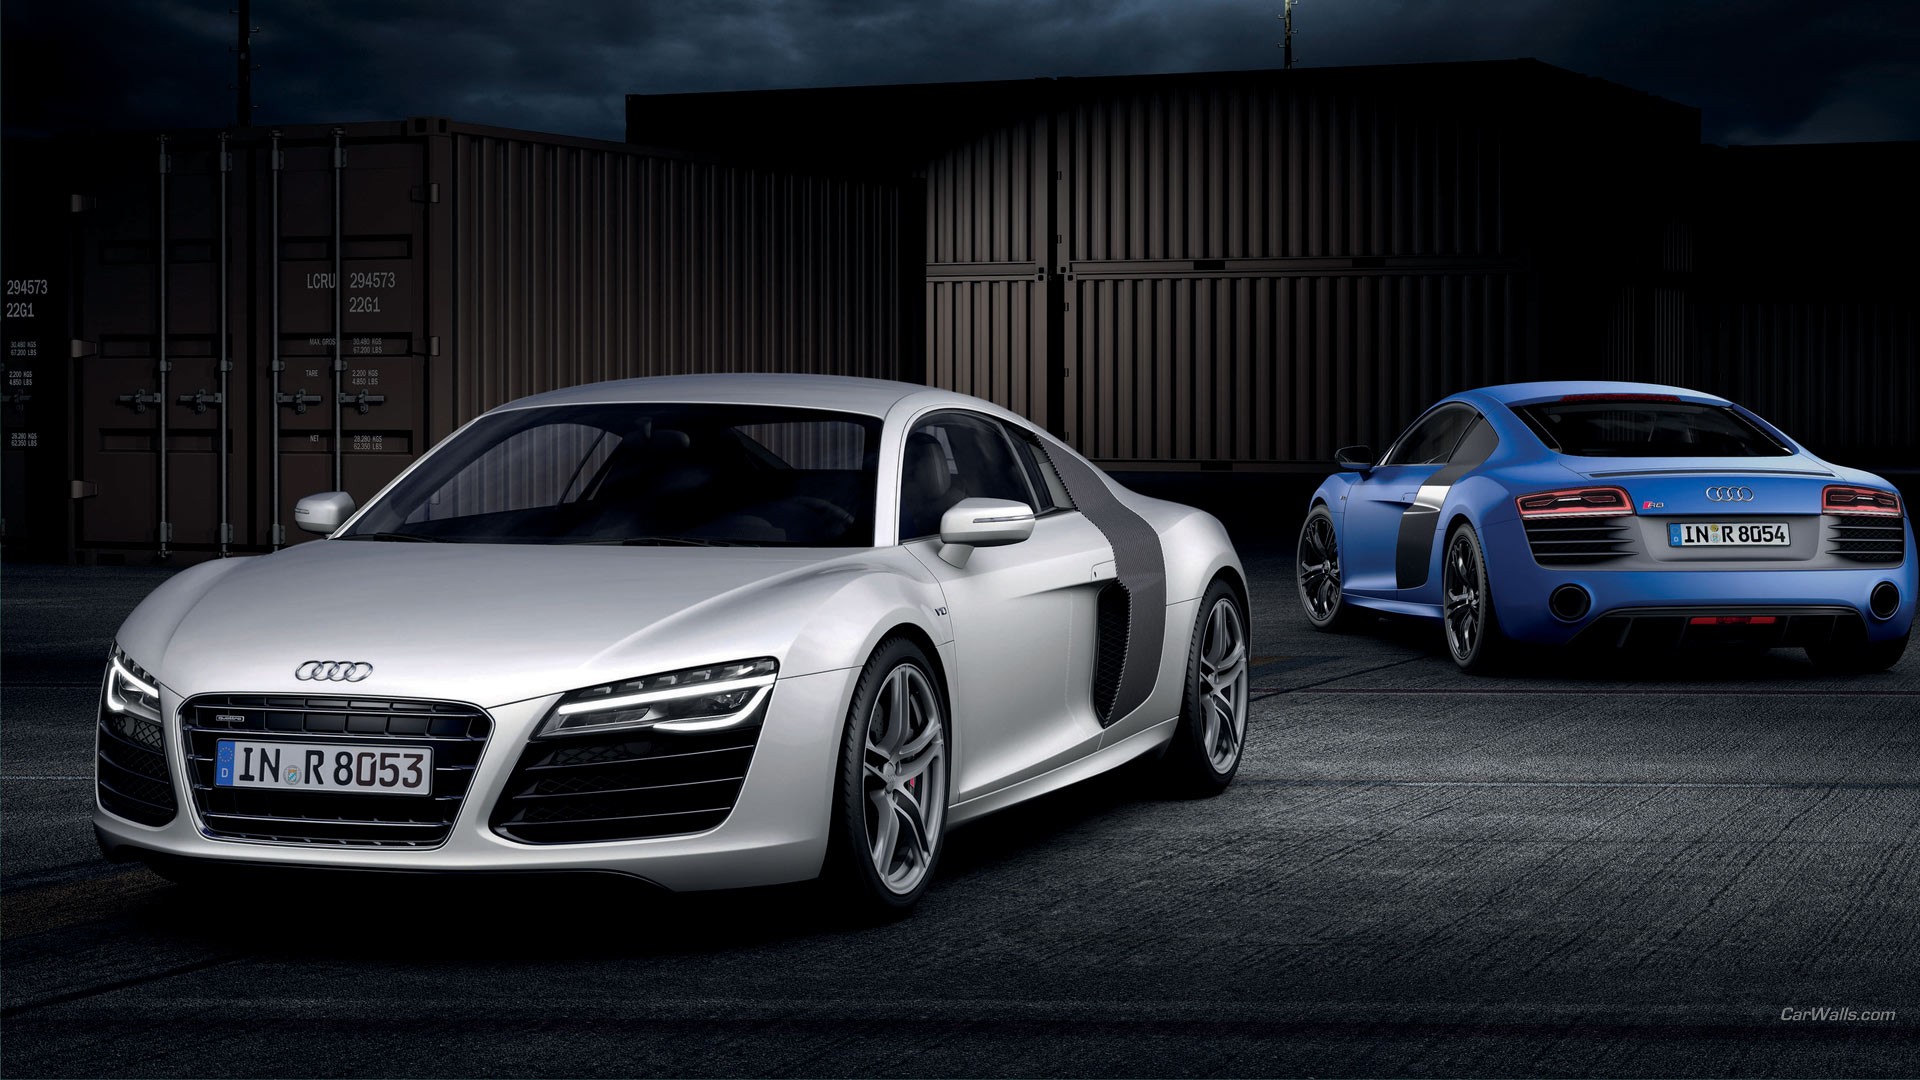 General 1920x1080 Audi R8 Audi car blue cars silver cars vehicle frontal view numbers German cars Volkswagen Group